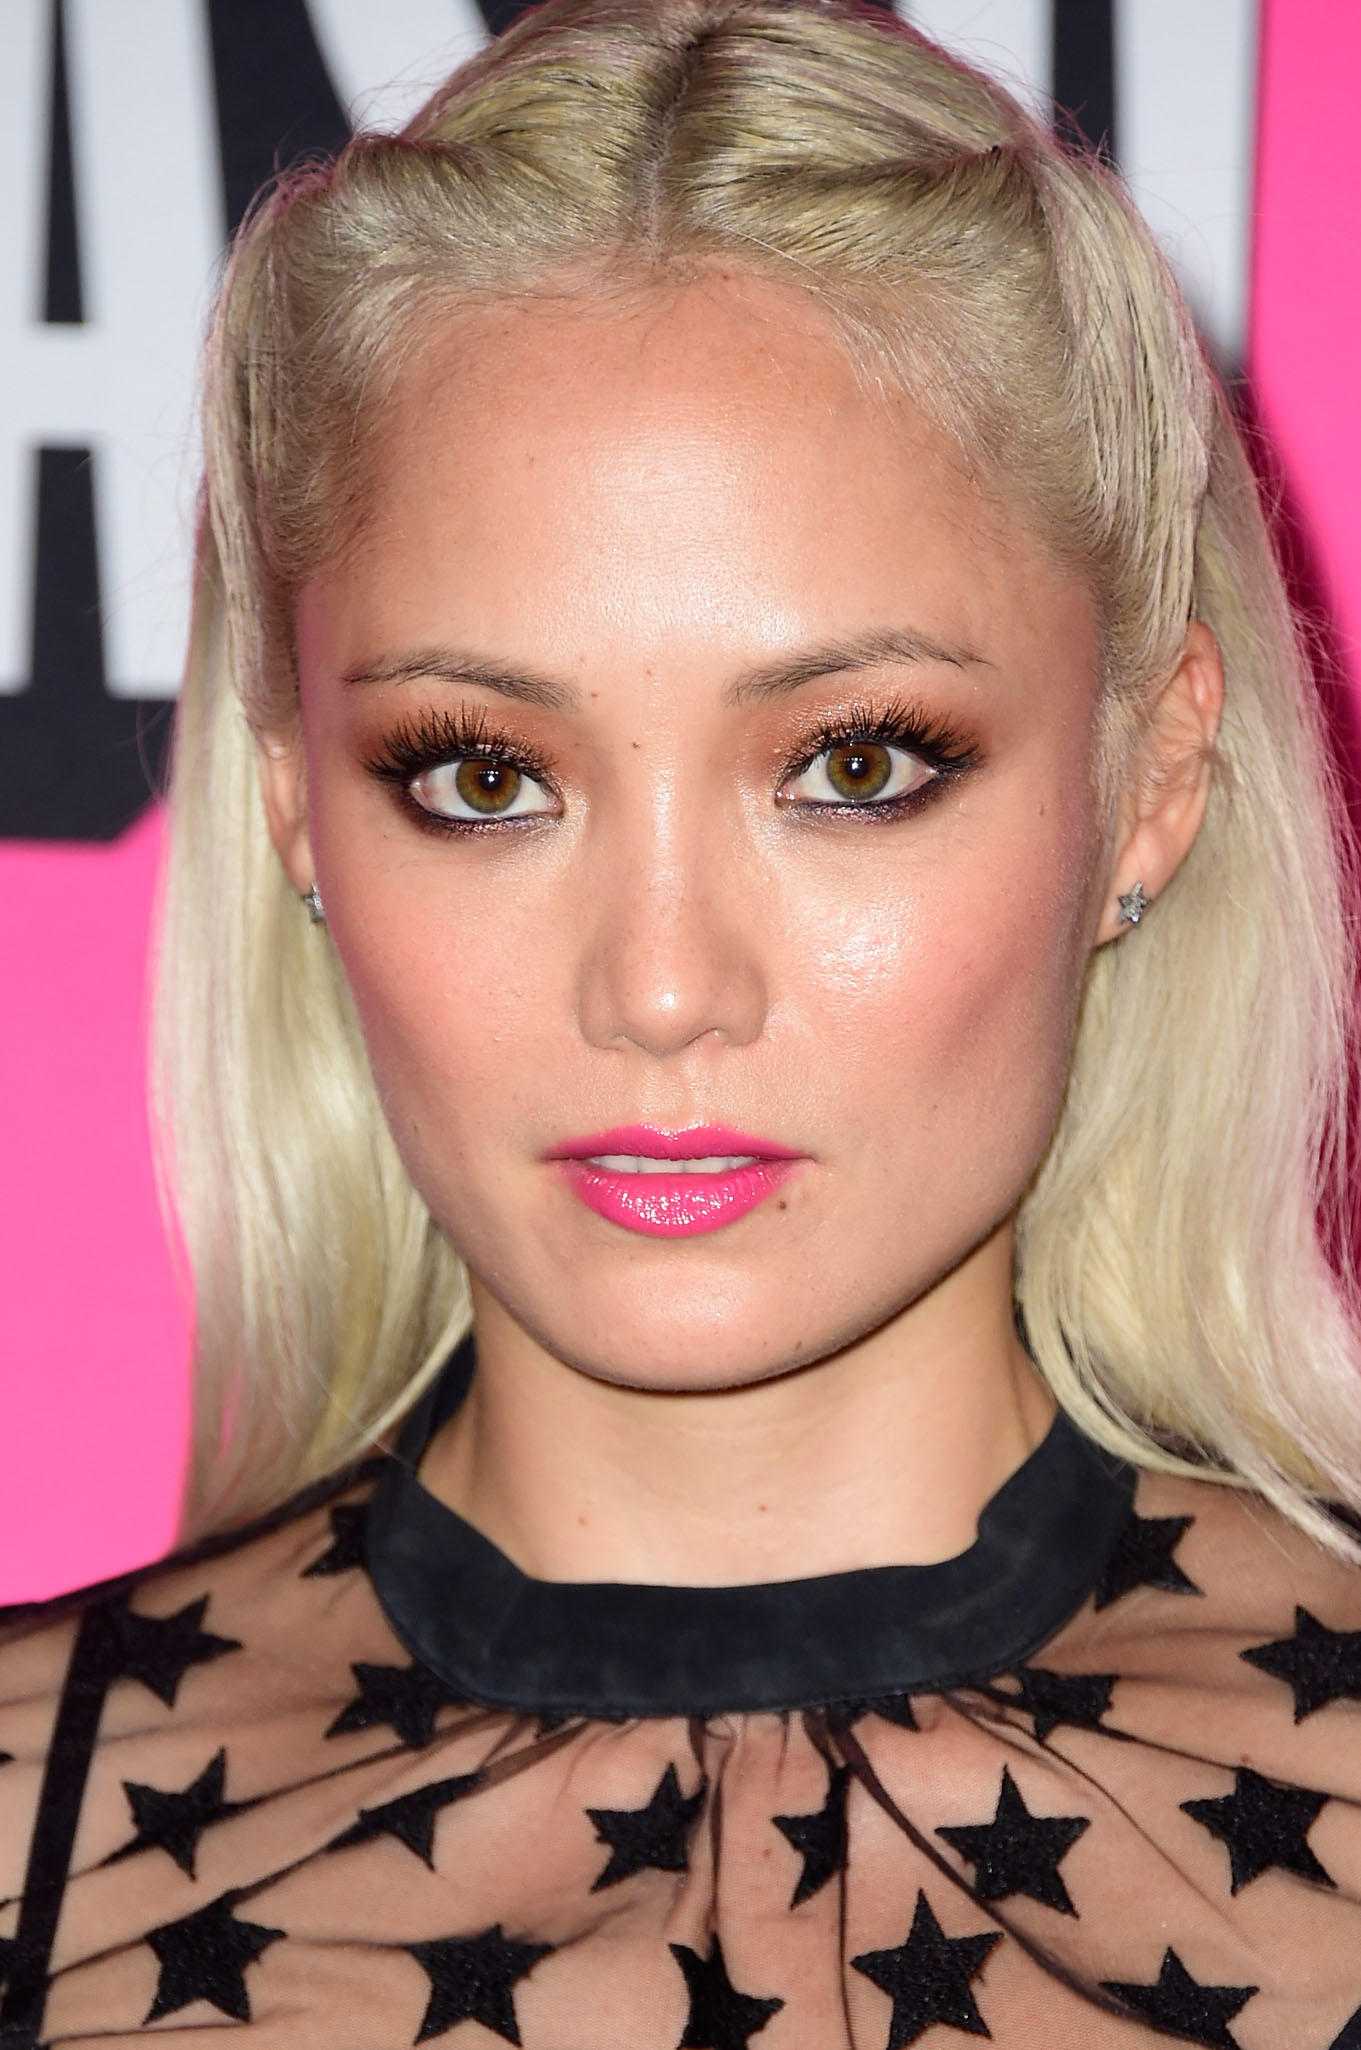 70+ Hot Pictures Of Pom Klementieff Who Plays Mantis In Marvel Cinematic Universe 122